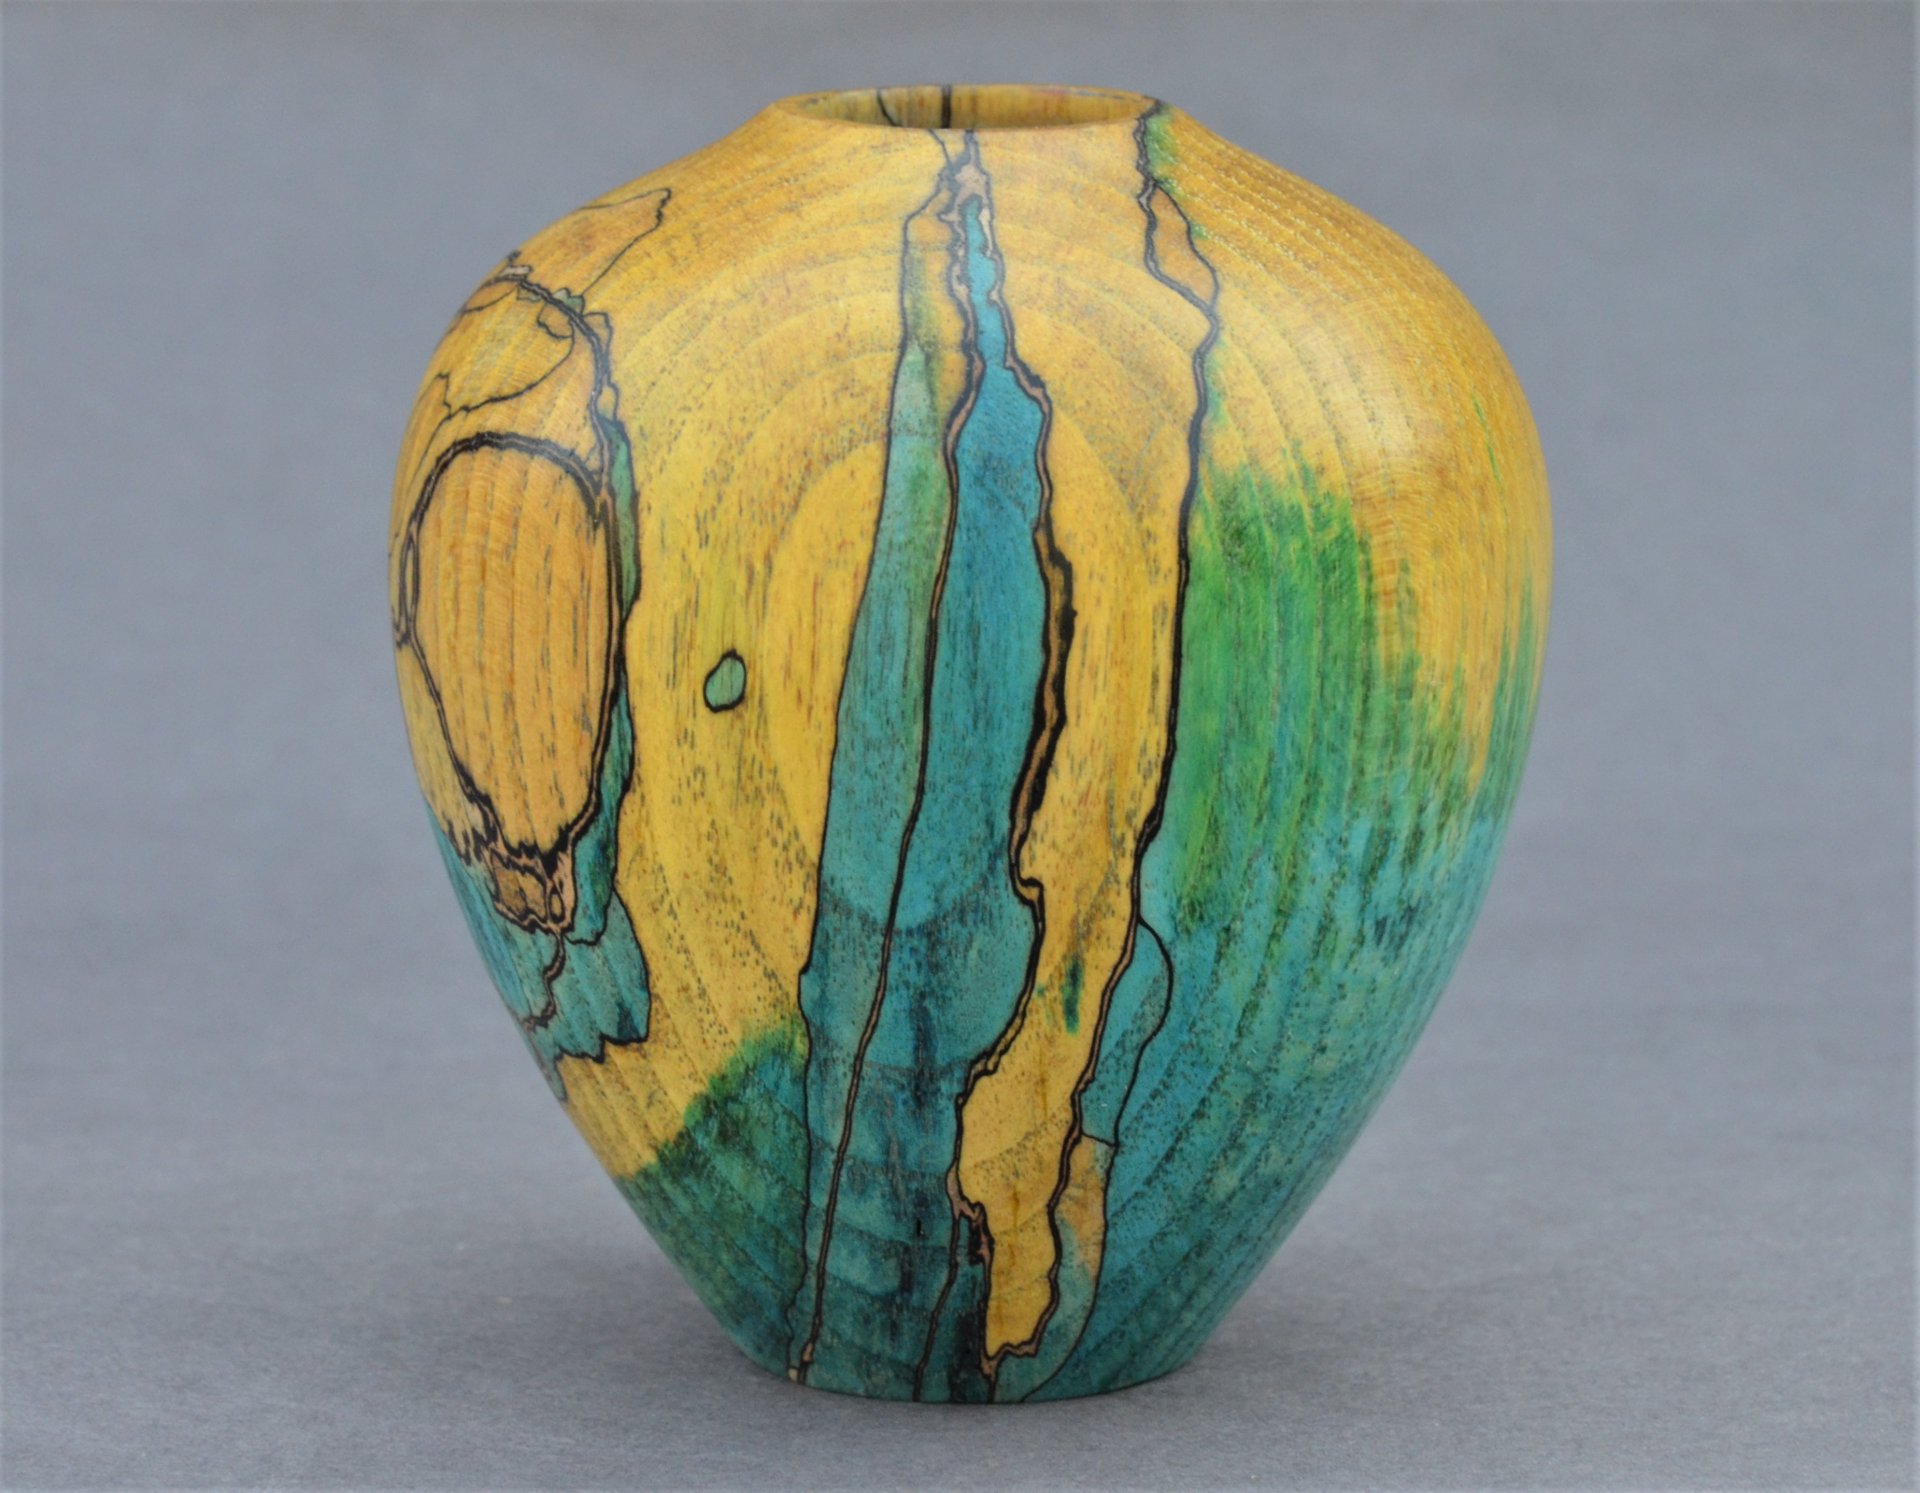 Spalted something